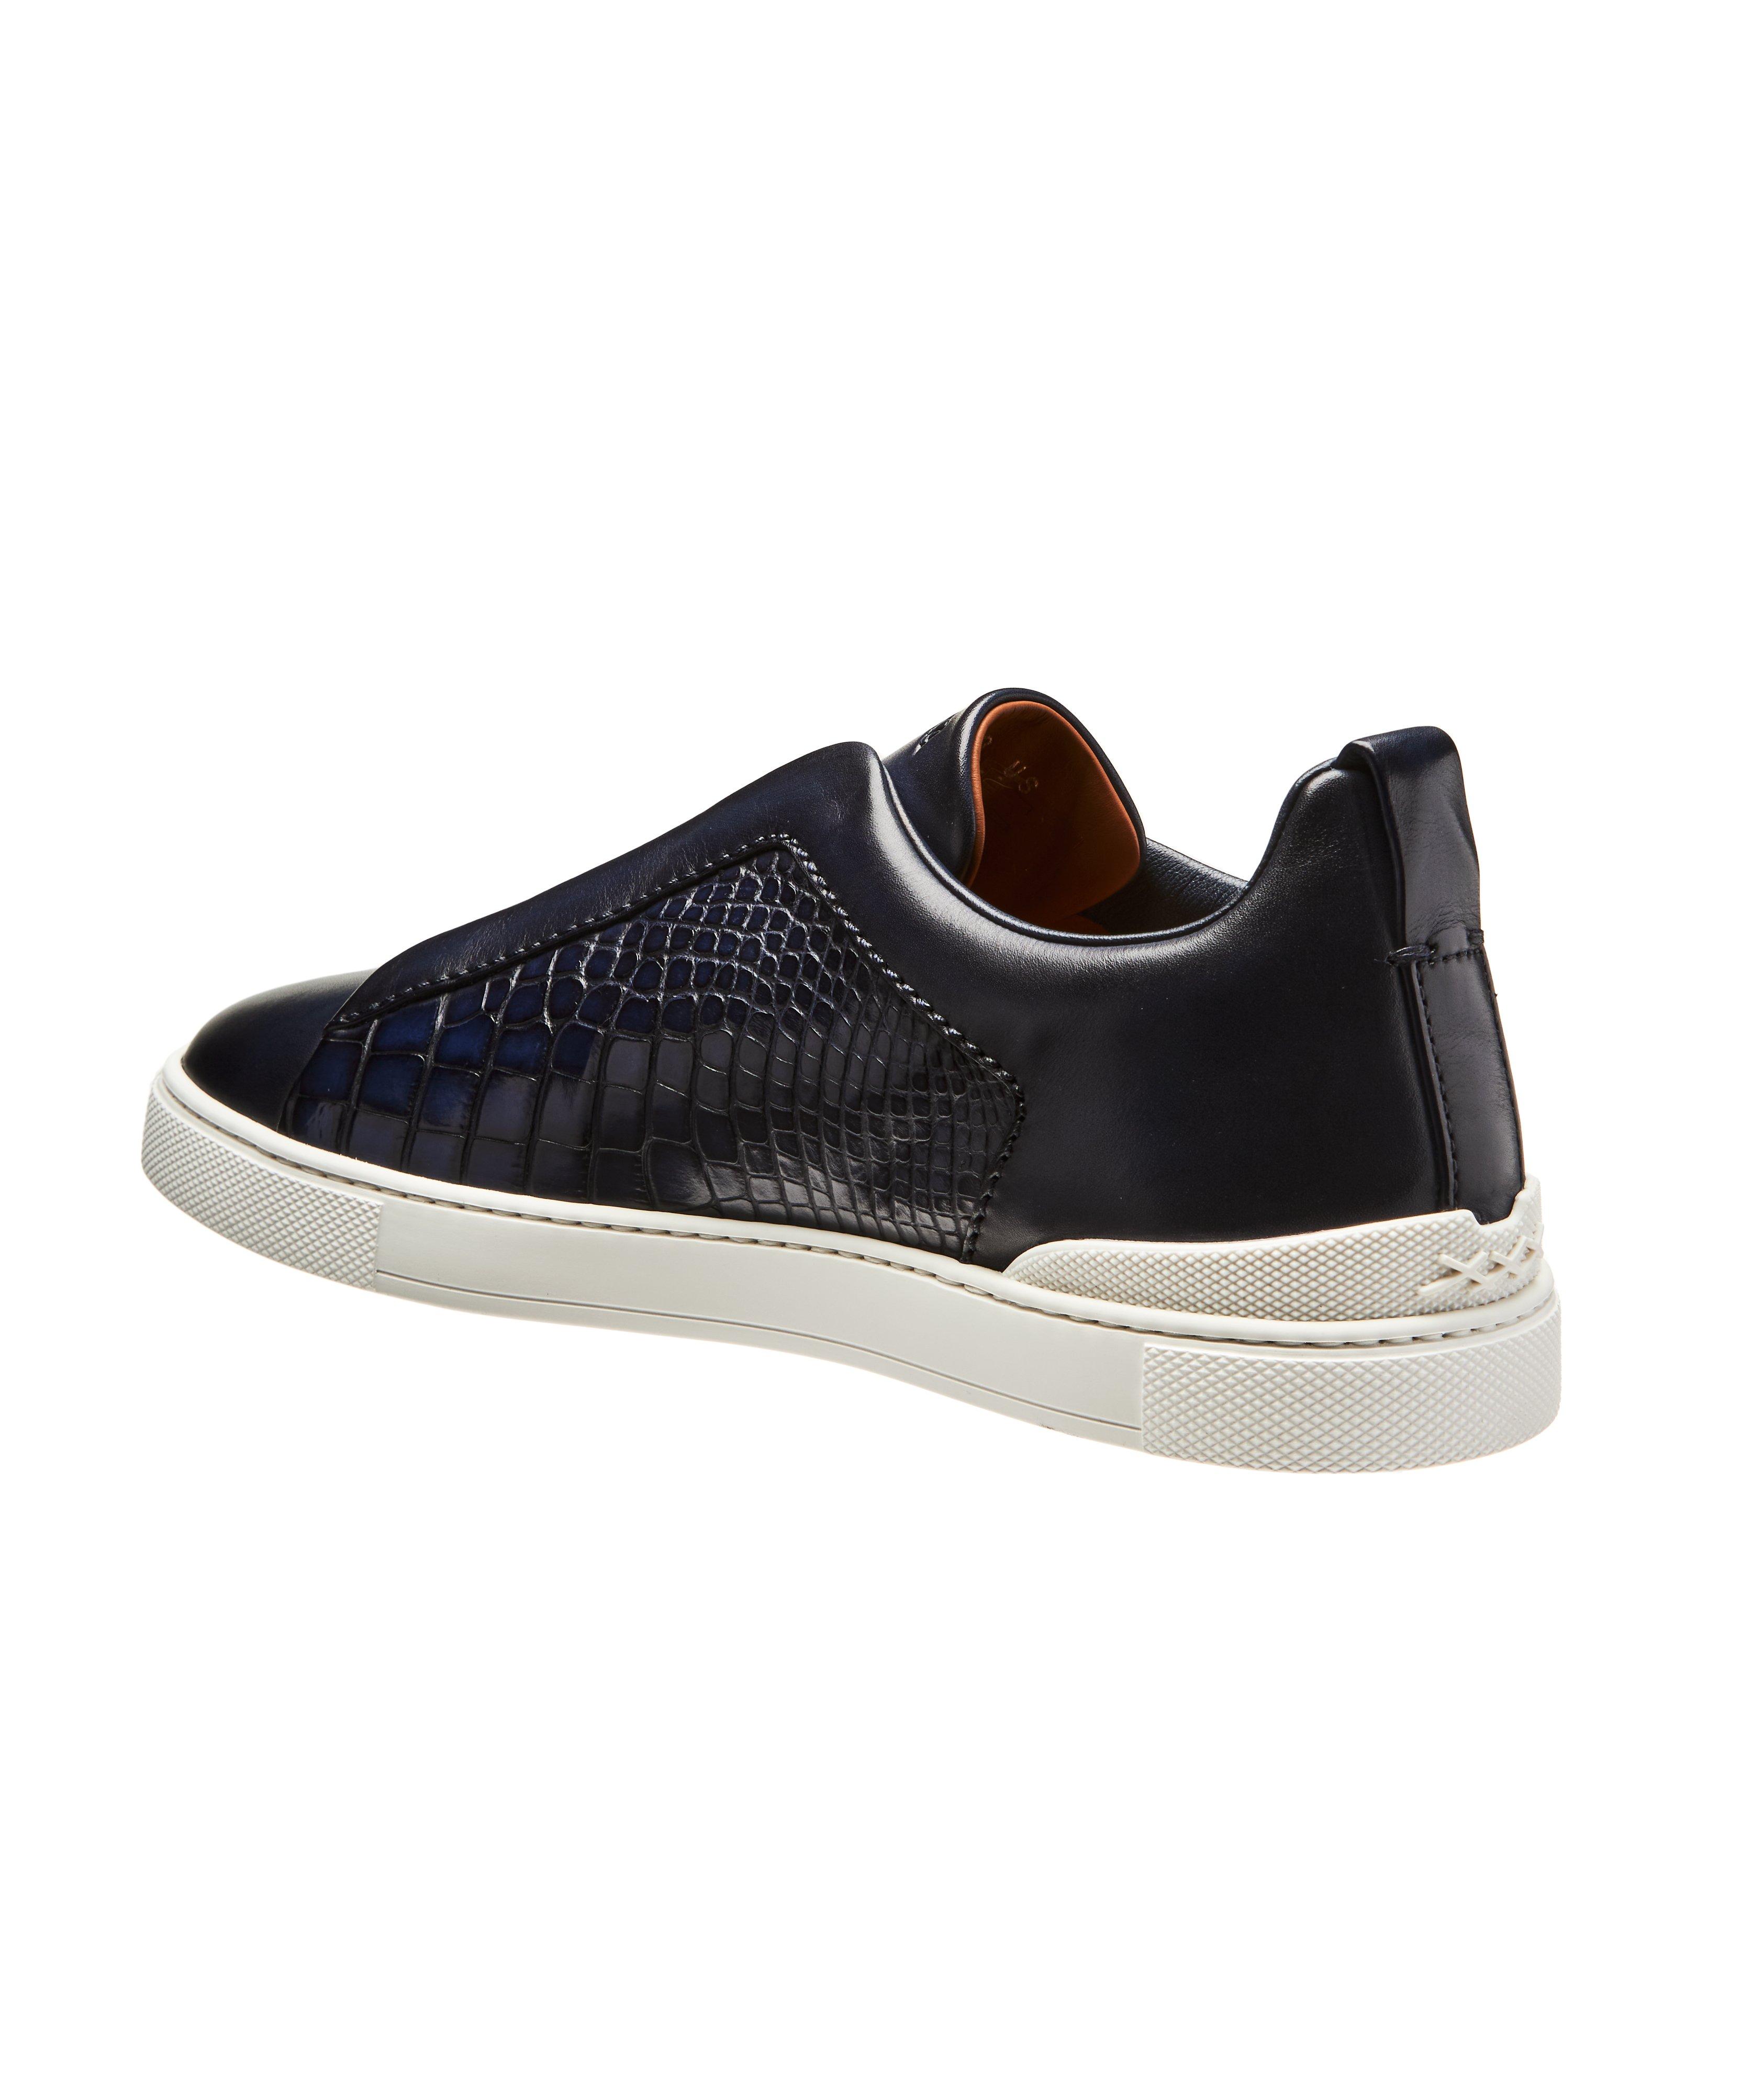 Burnished Alligator Leather Triple Stitch Sneakers image 1